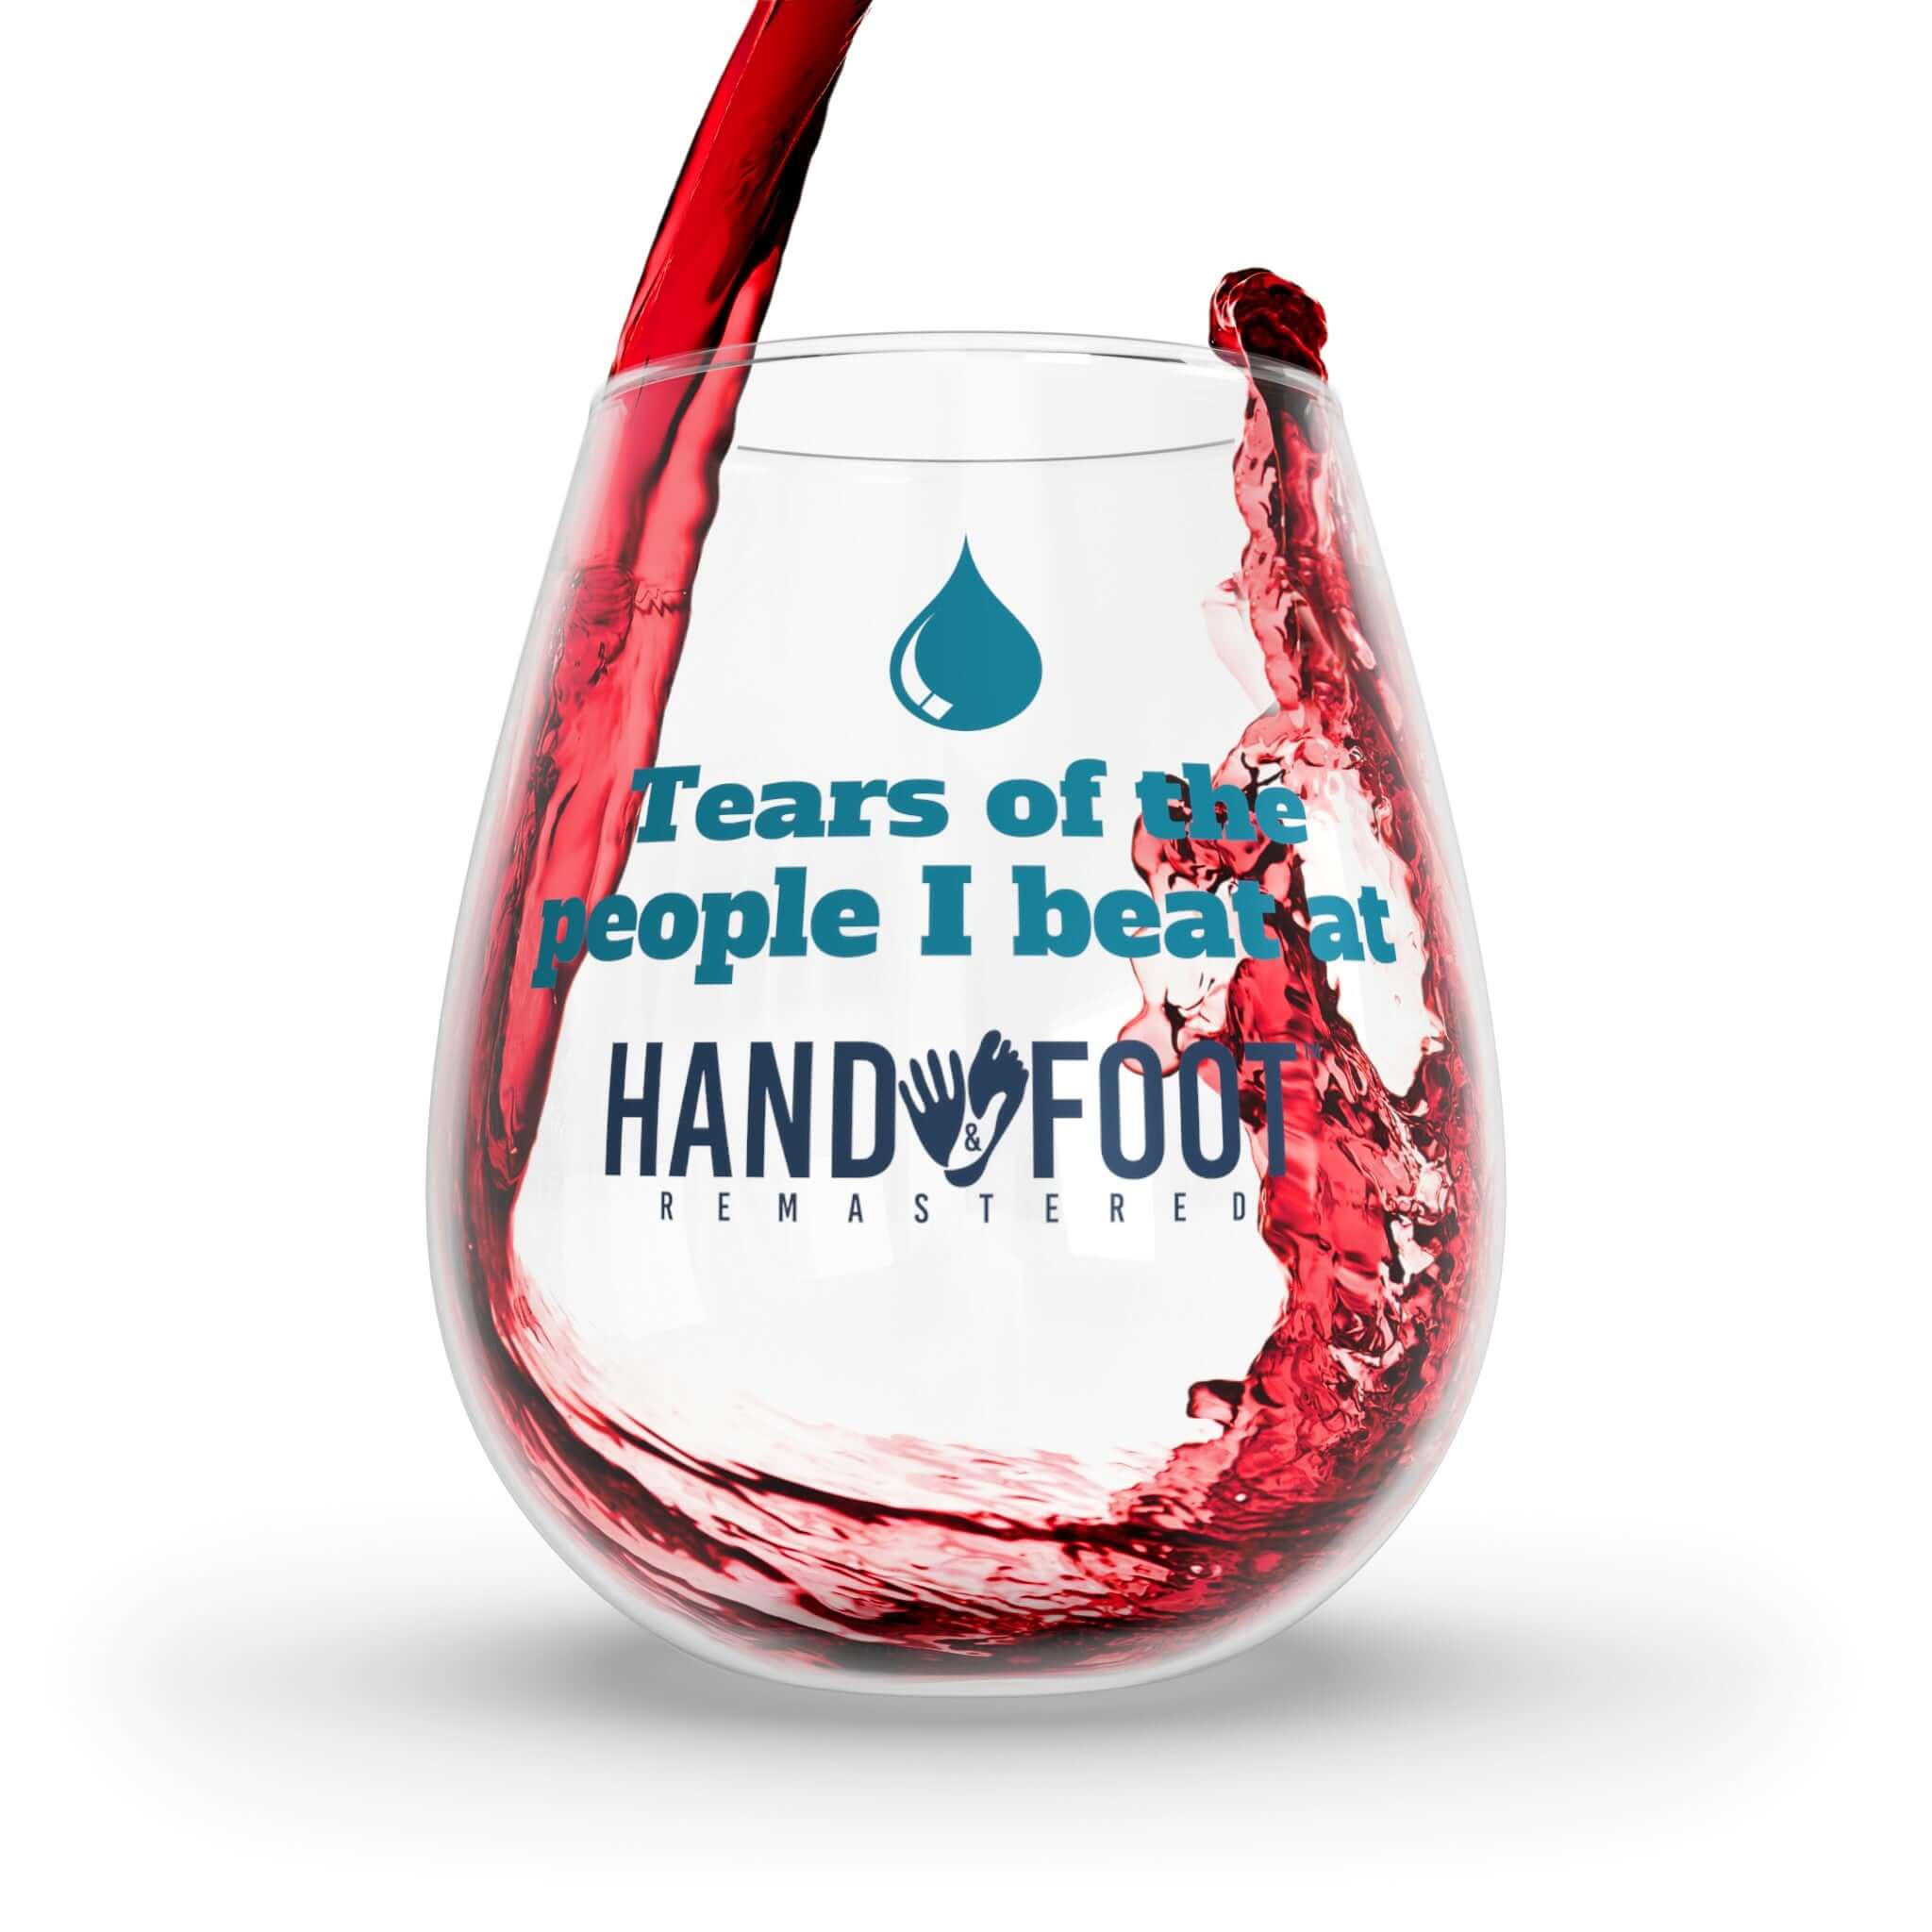 Tears of the People I Beat Hand & Foot Stemless Wine Glass